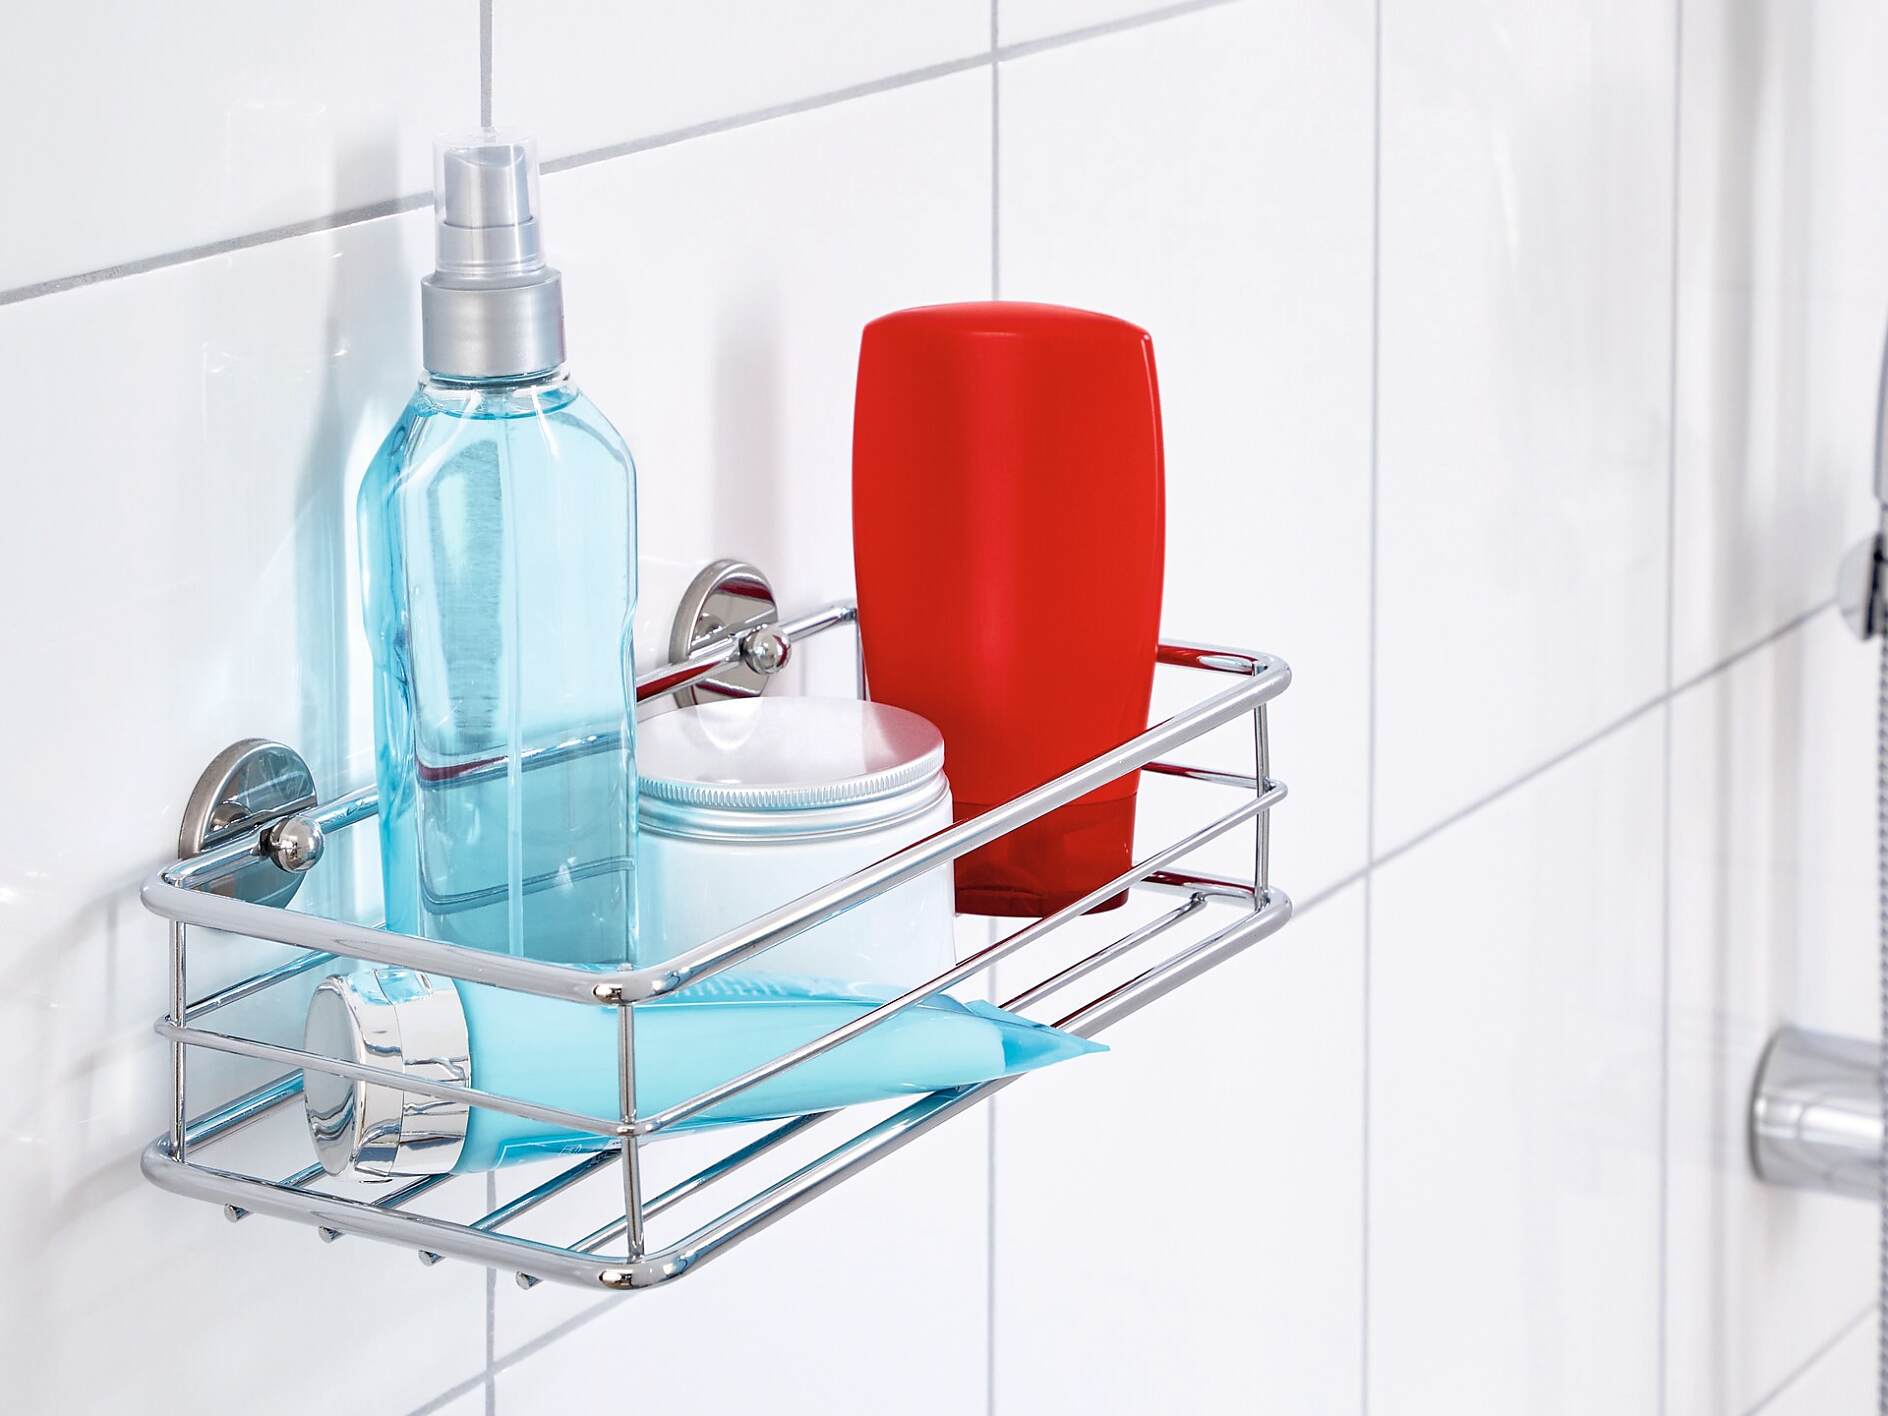 Home Basics Chrome Plated Steel Shower Caddy With Wash Cloth Bar, SHOWER